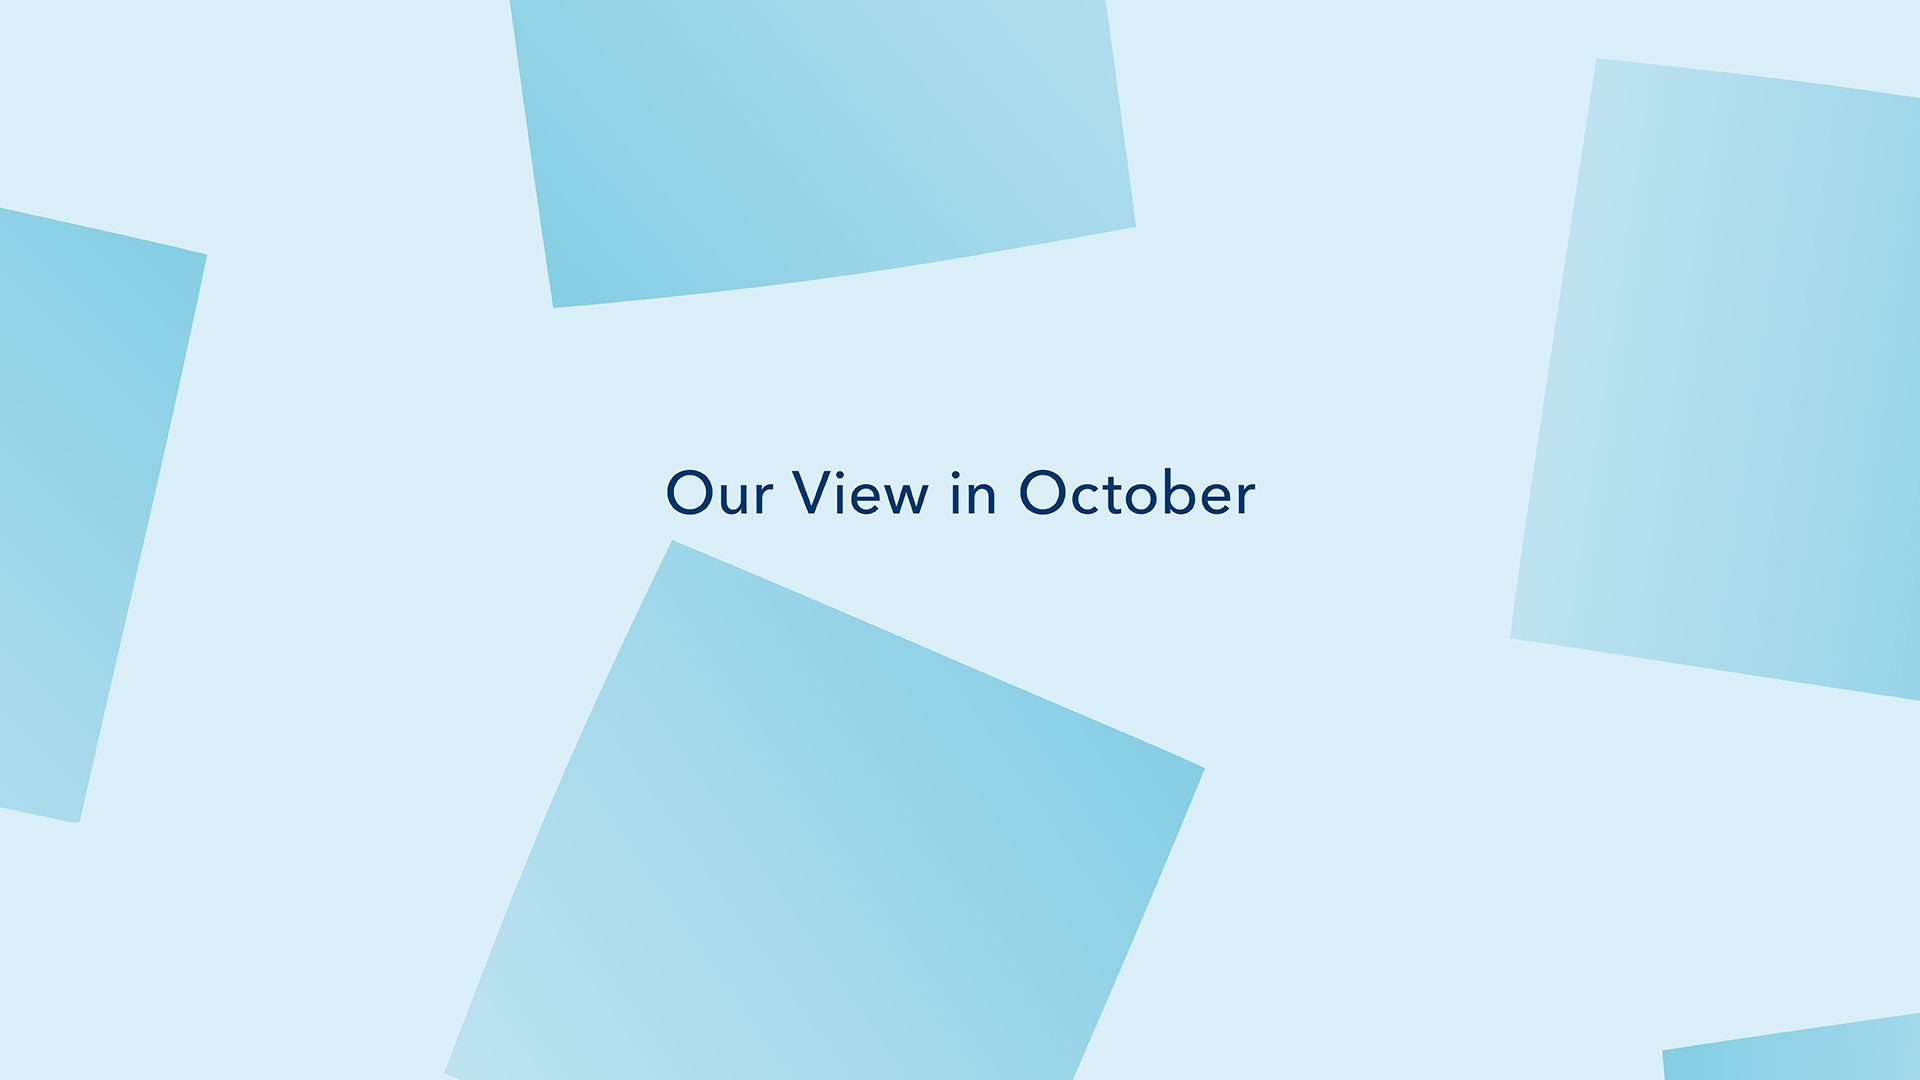 Experts Digital - Our View in October